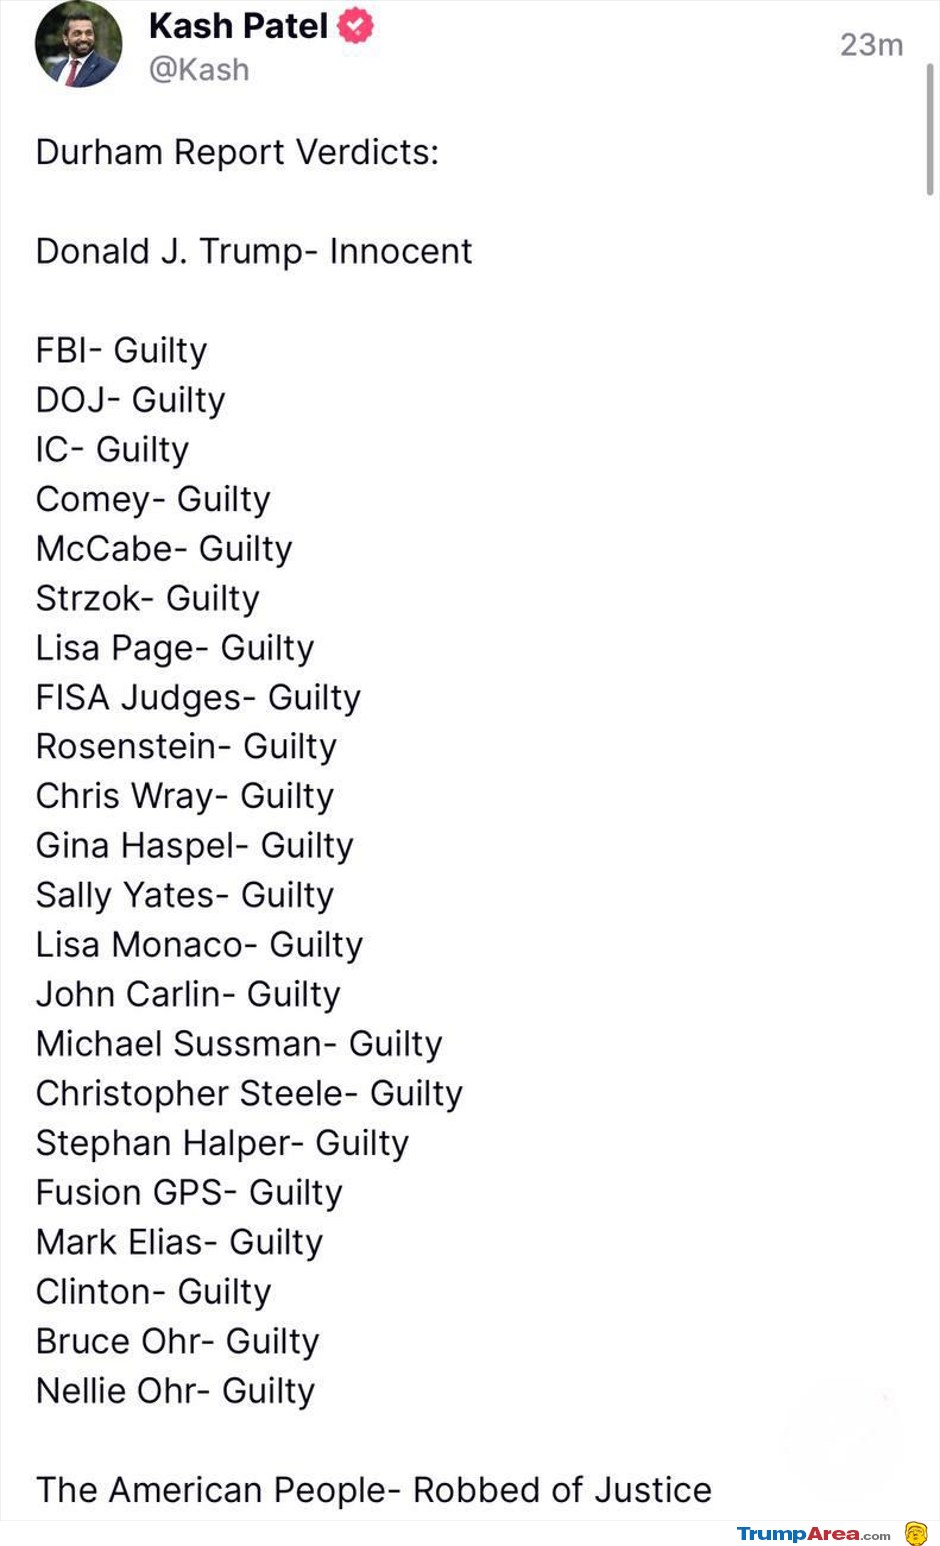 The People Who Were Guilty